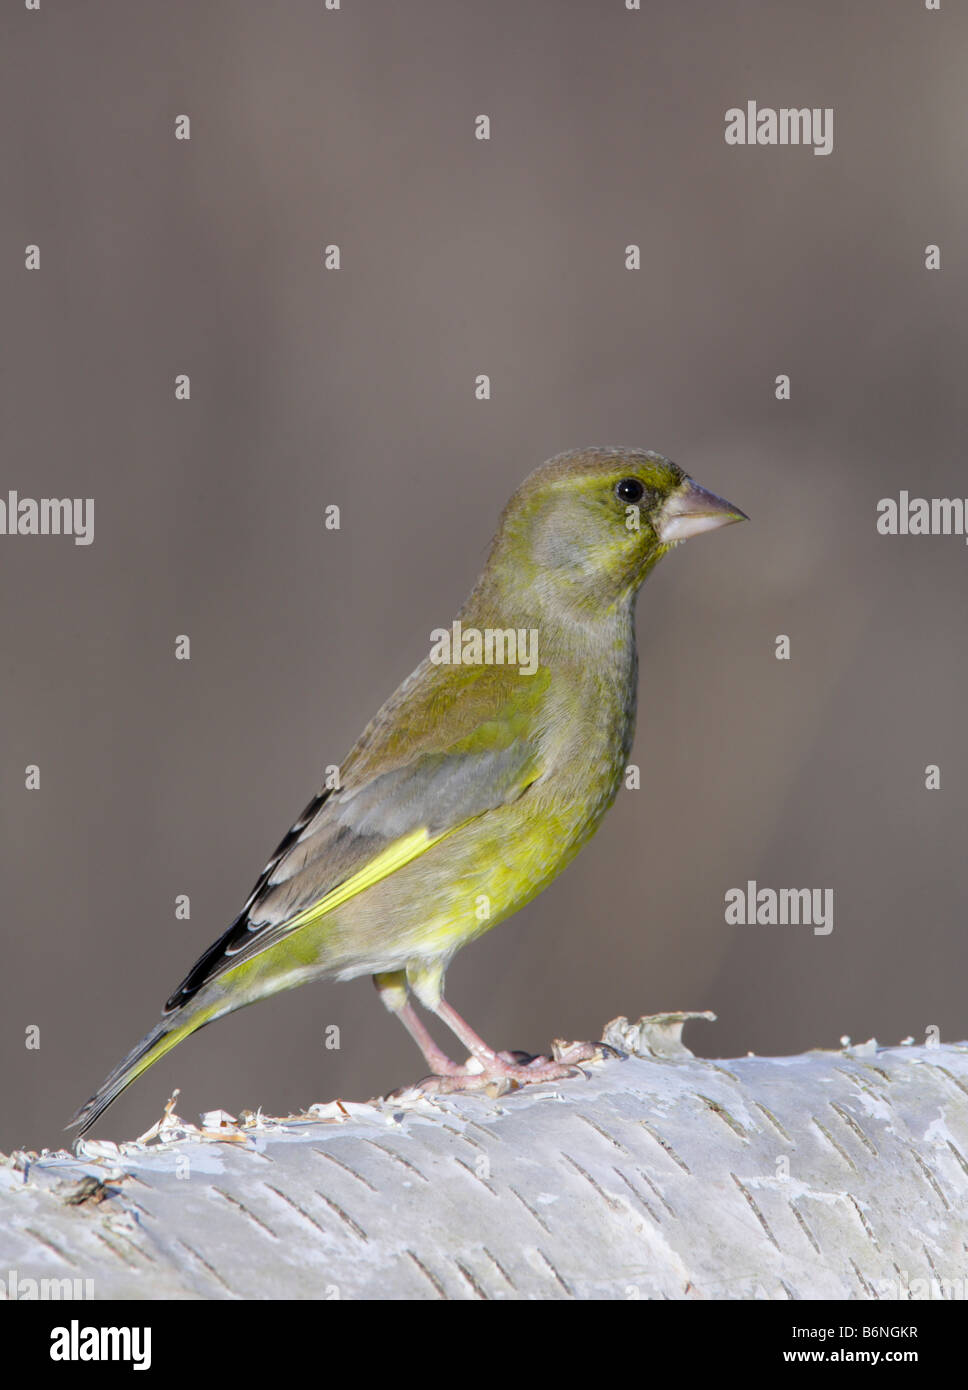 Greenfinch Carduelis chloris perched on Silver birch log Stock Photo